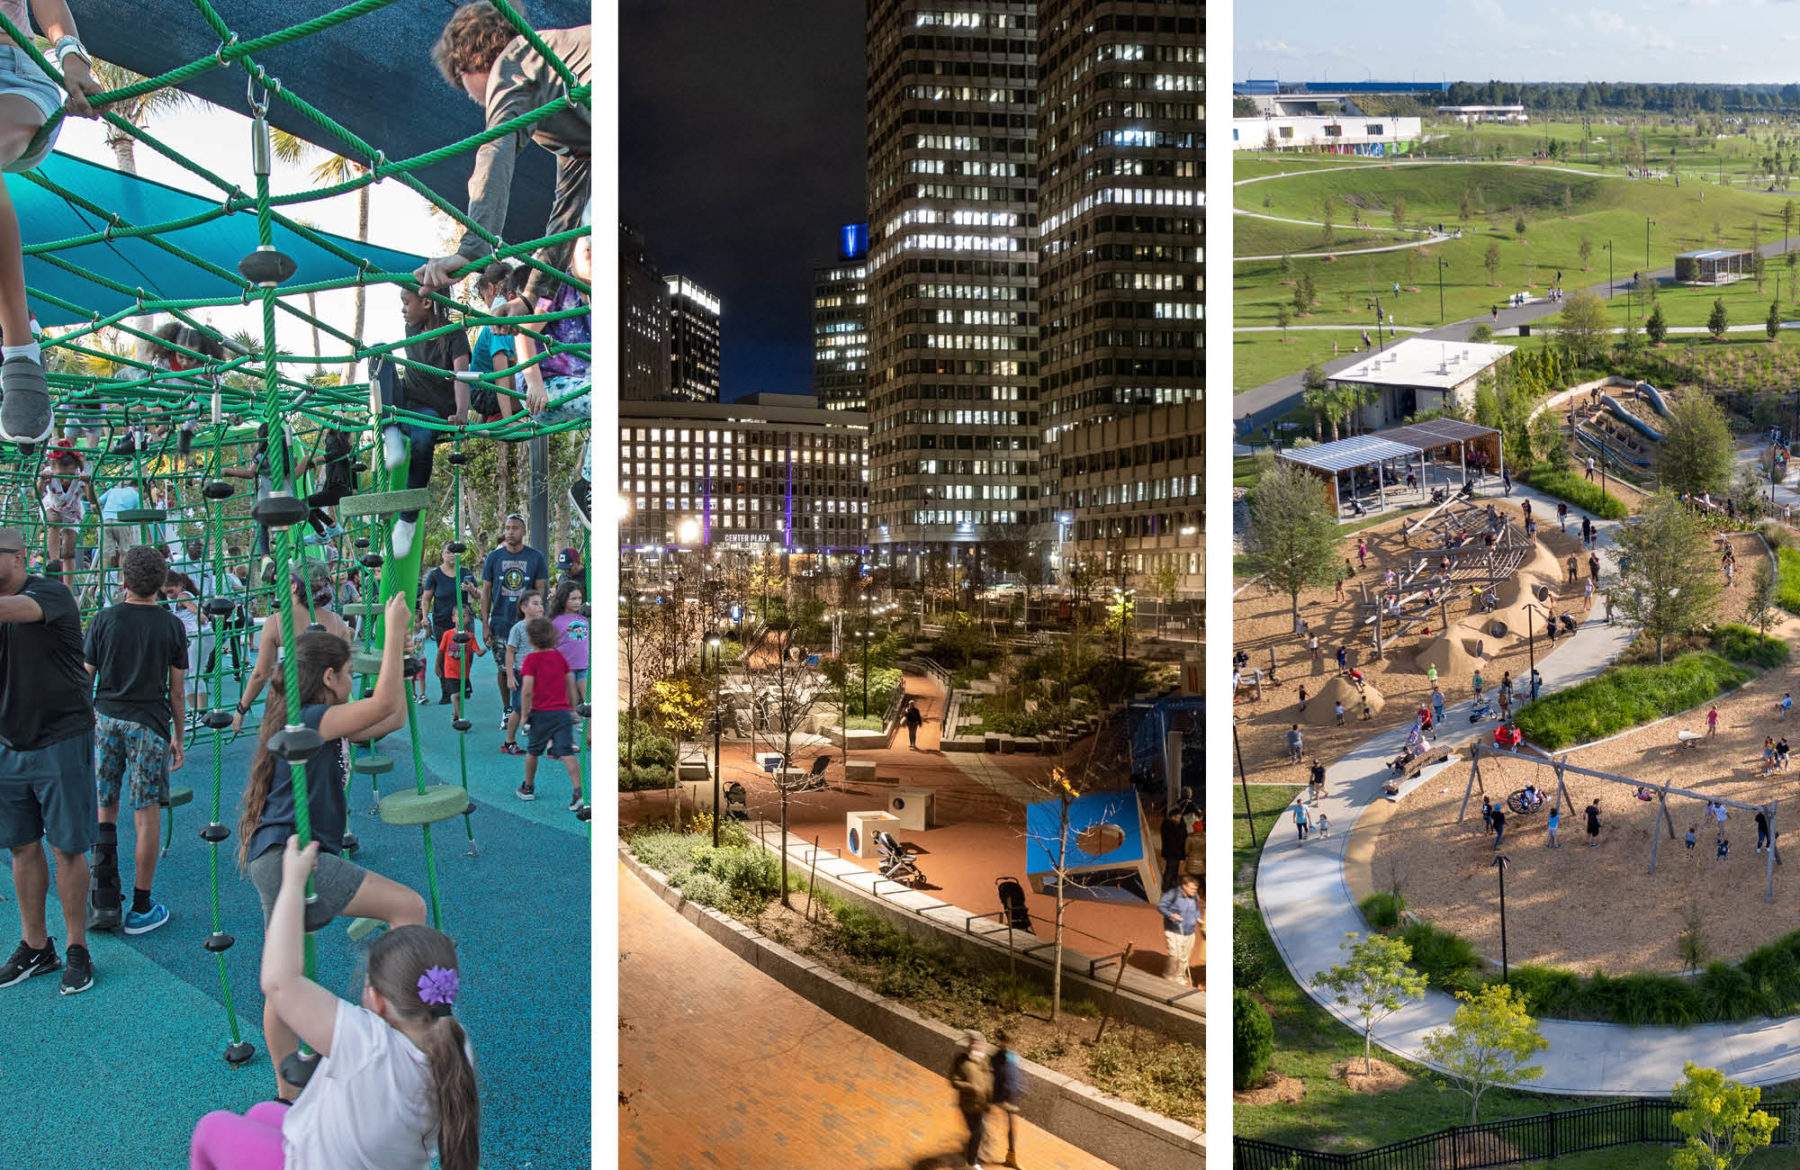 Three images spliced together: first image: blue playground with children climbing on green rope structure. Second image: nighttime shot of boston city hall plaza third image: Aerial view of Bonnet Springs Park Play space with rolling hills in the background